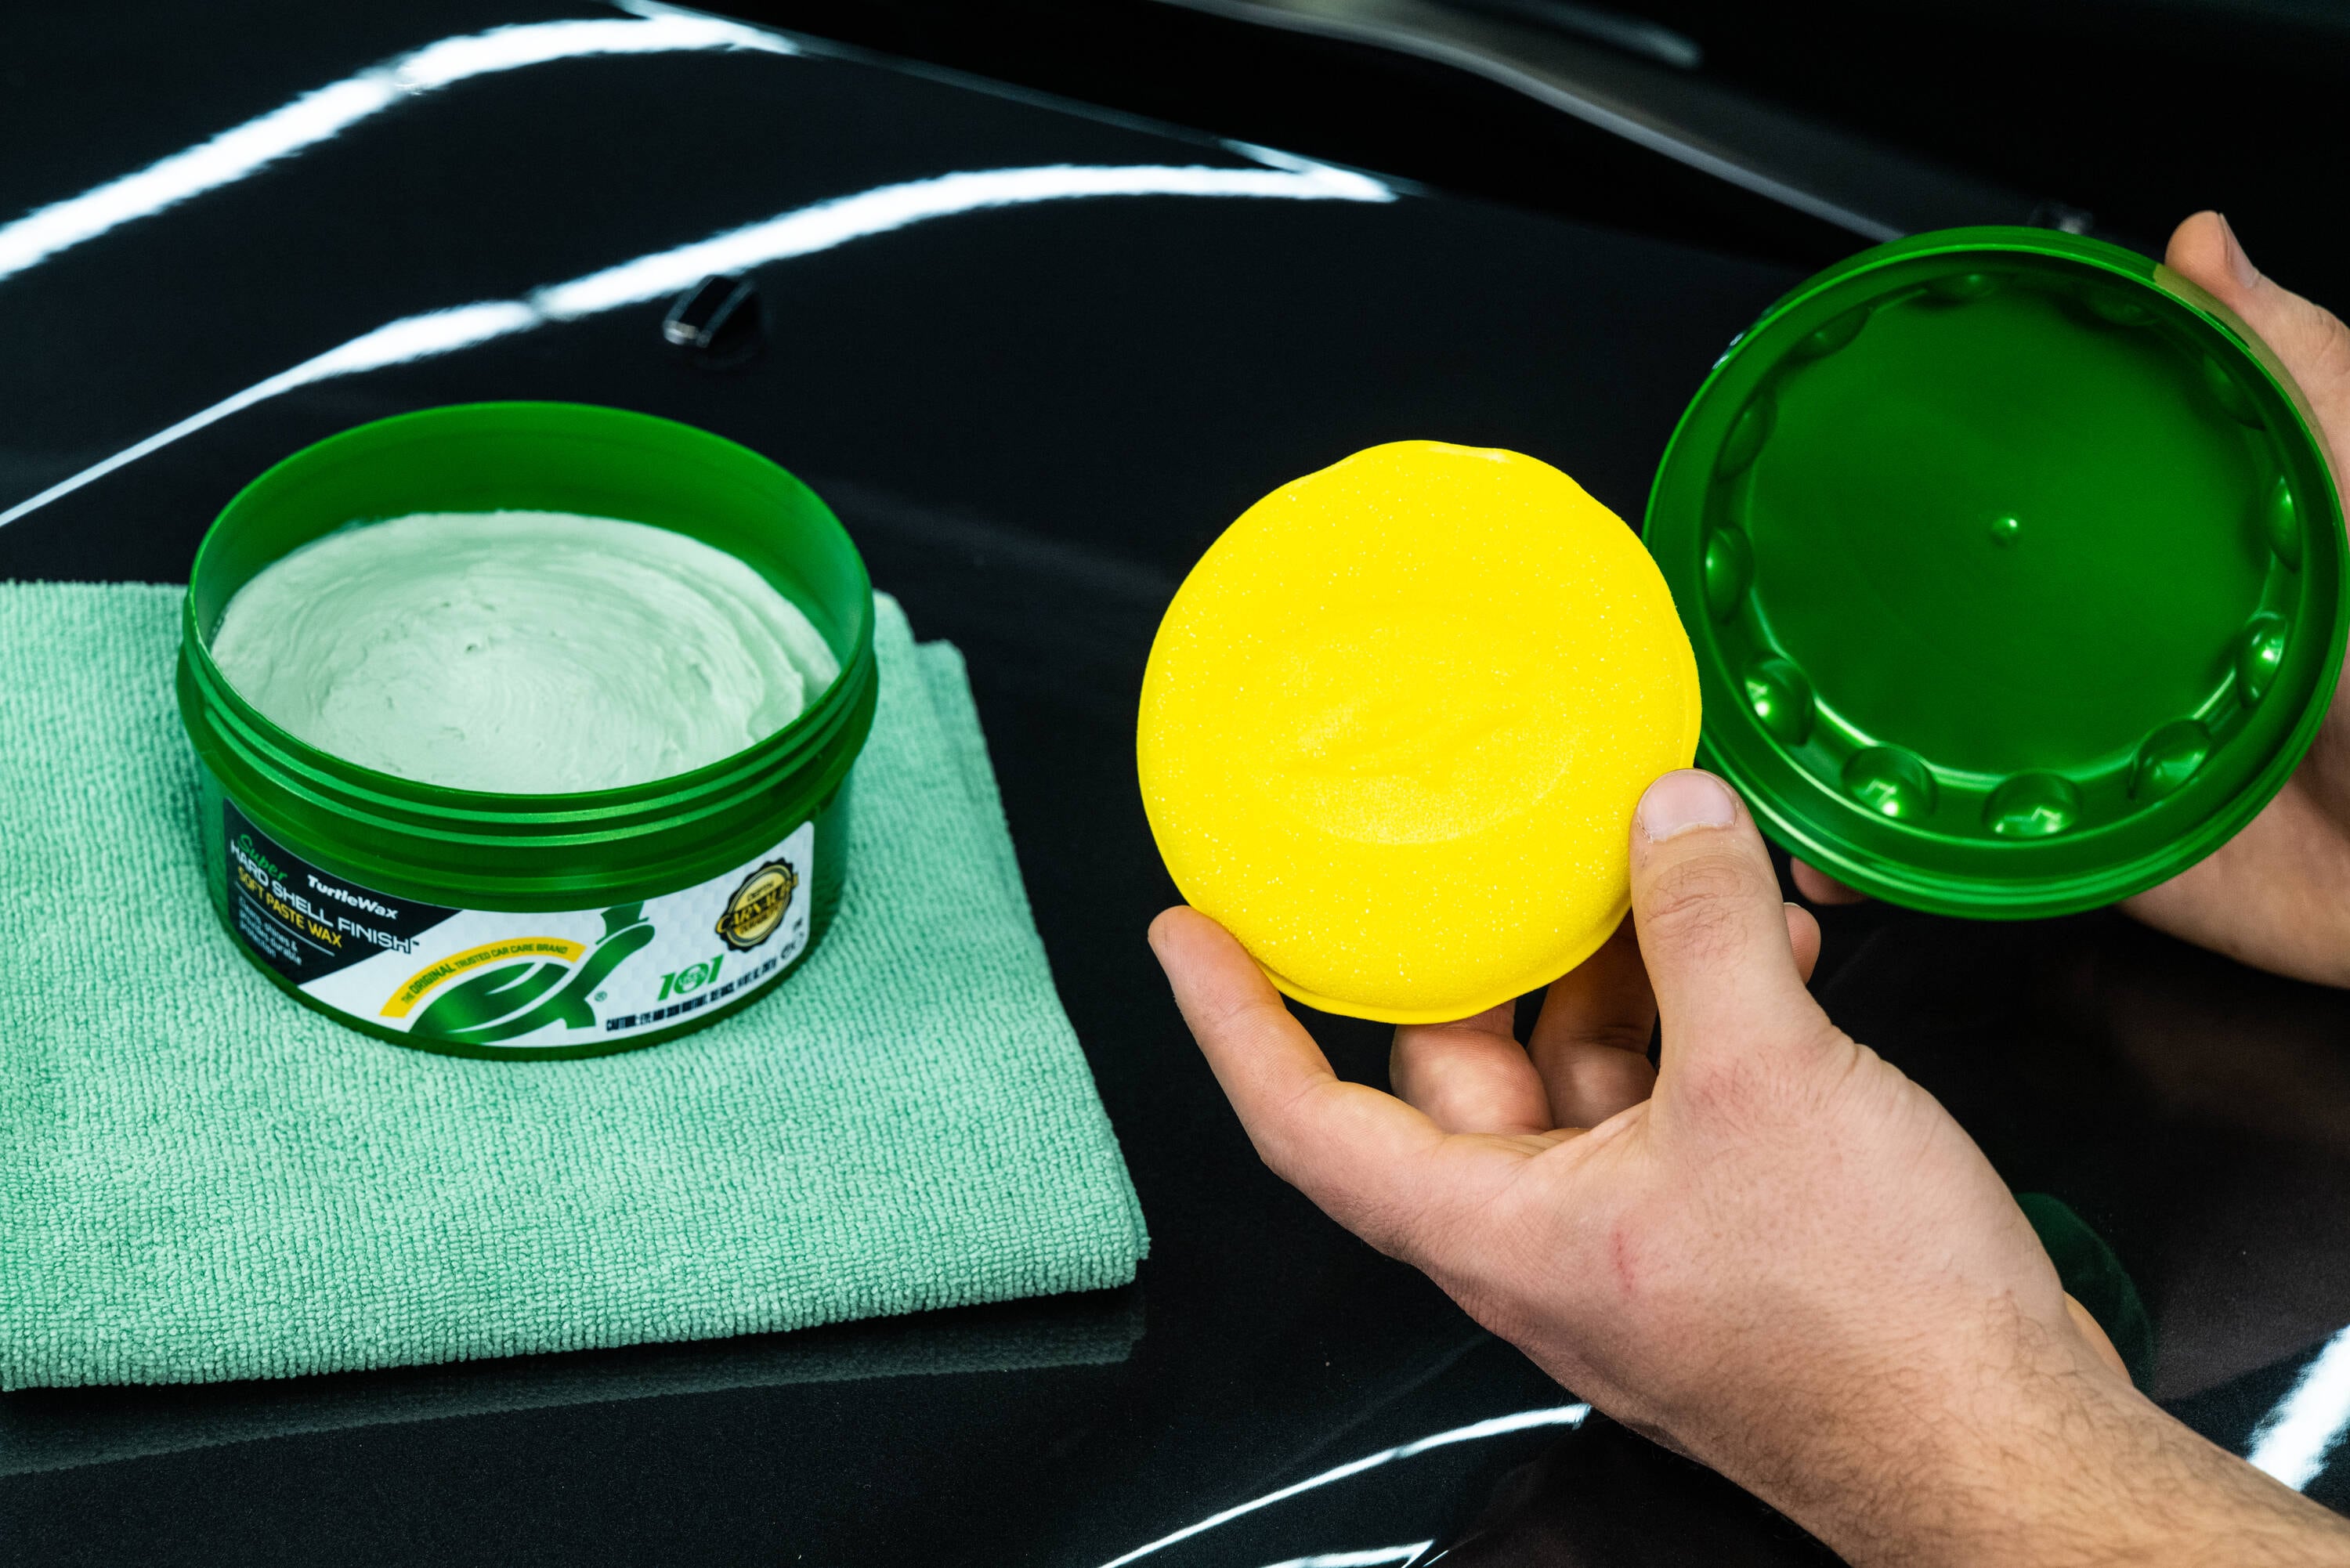 Turtle Wax World's Leading Car Wax 14-oz - Protects Against UV Rays & Acid  Rain - Easy On, Easy Off Formula - Body Wax with Rain Repellent in the Car  Exterior Cleaners